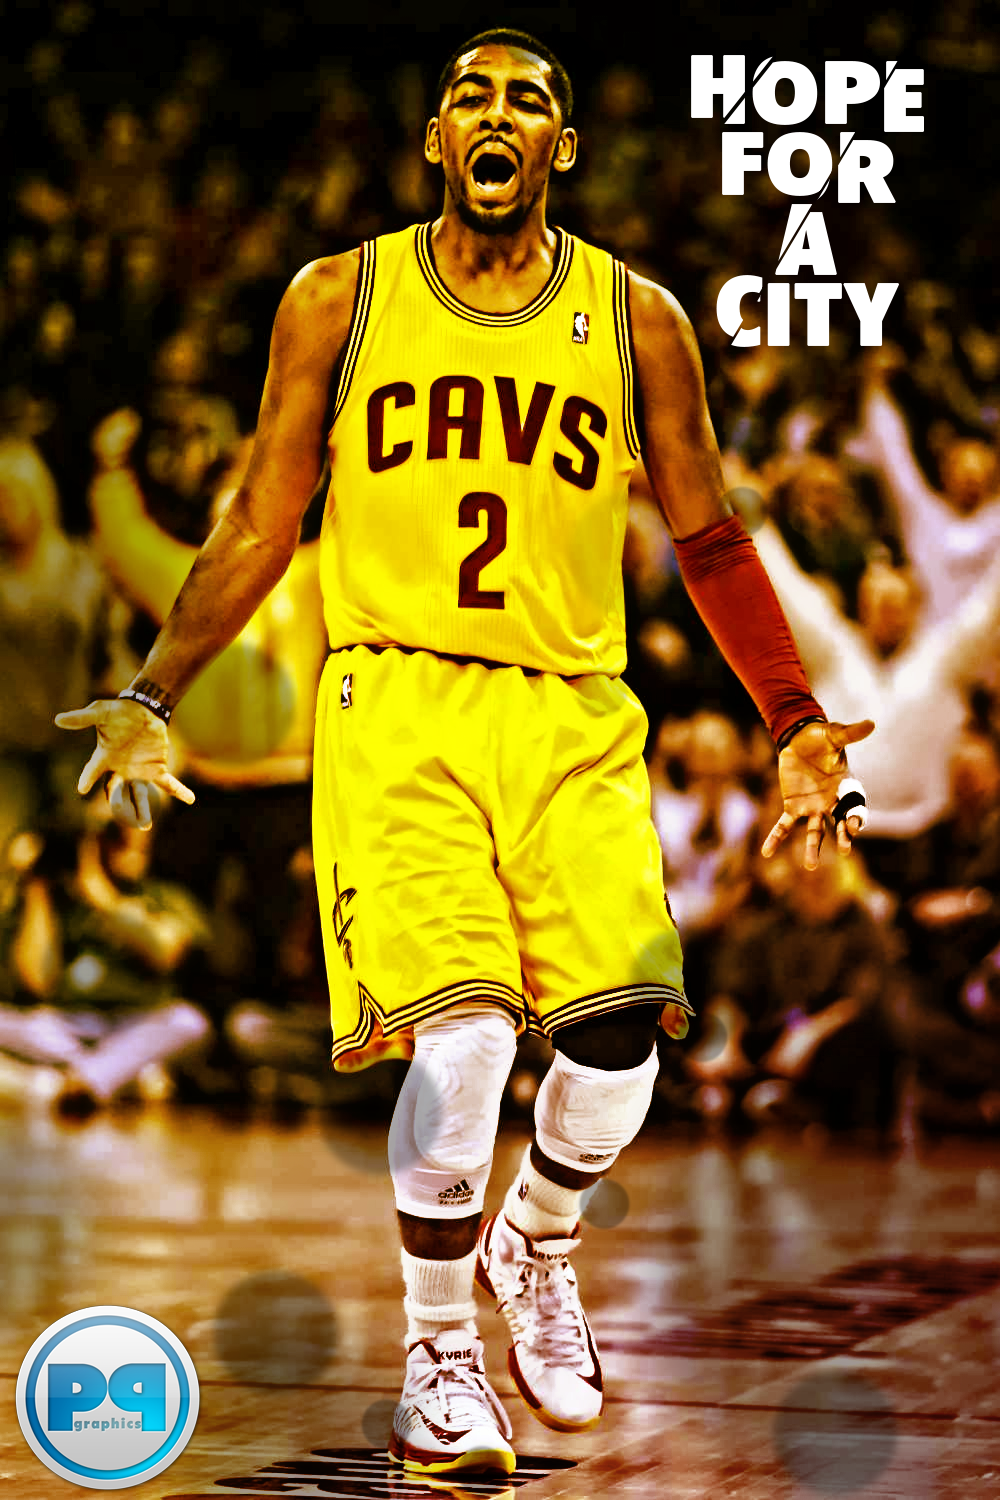 Kyrie Irving Hope for a City, iPhone Wallpaper by PavanPGraphics on  DeviantArt